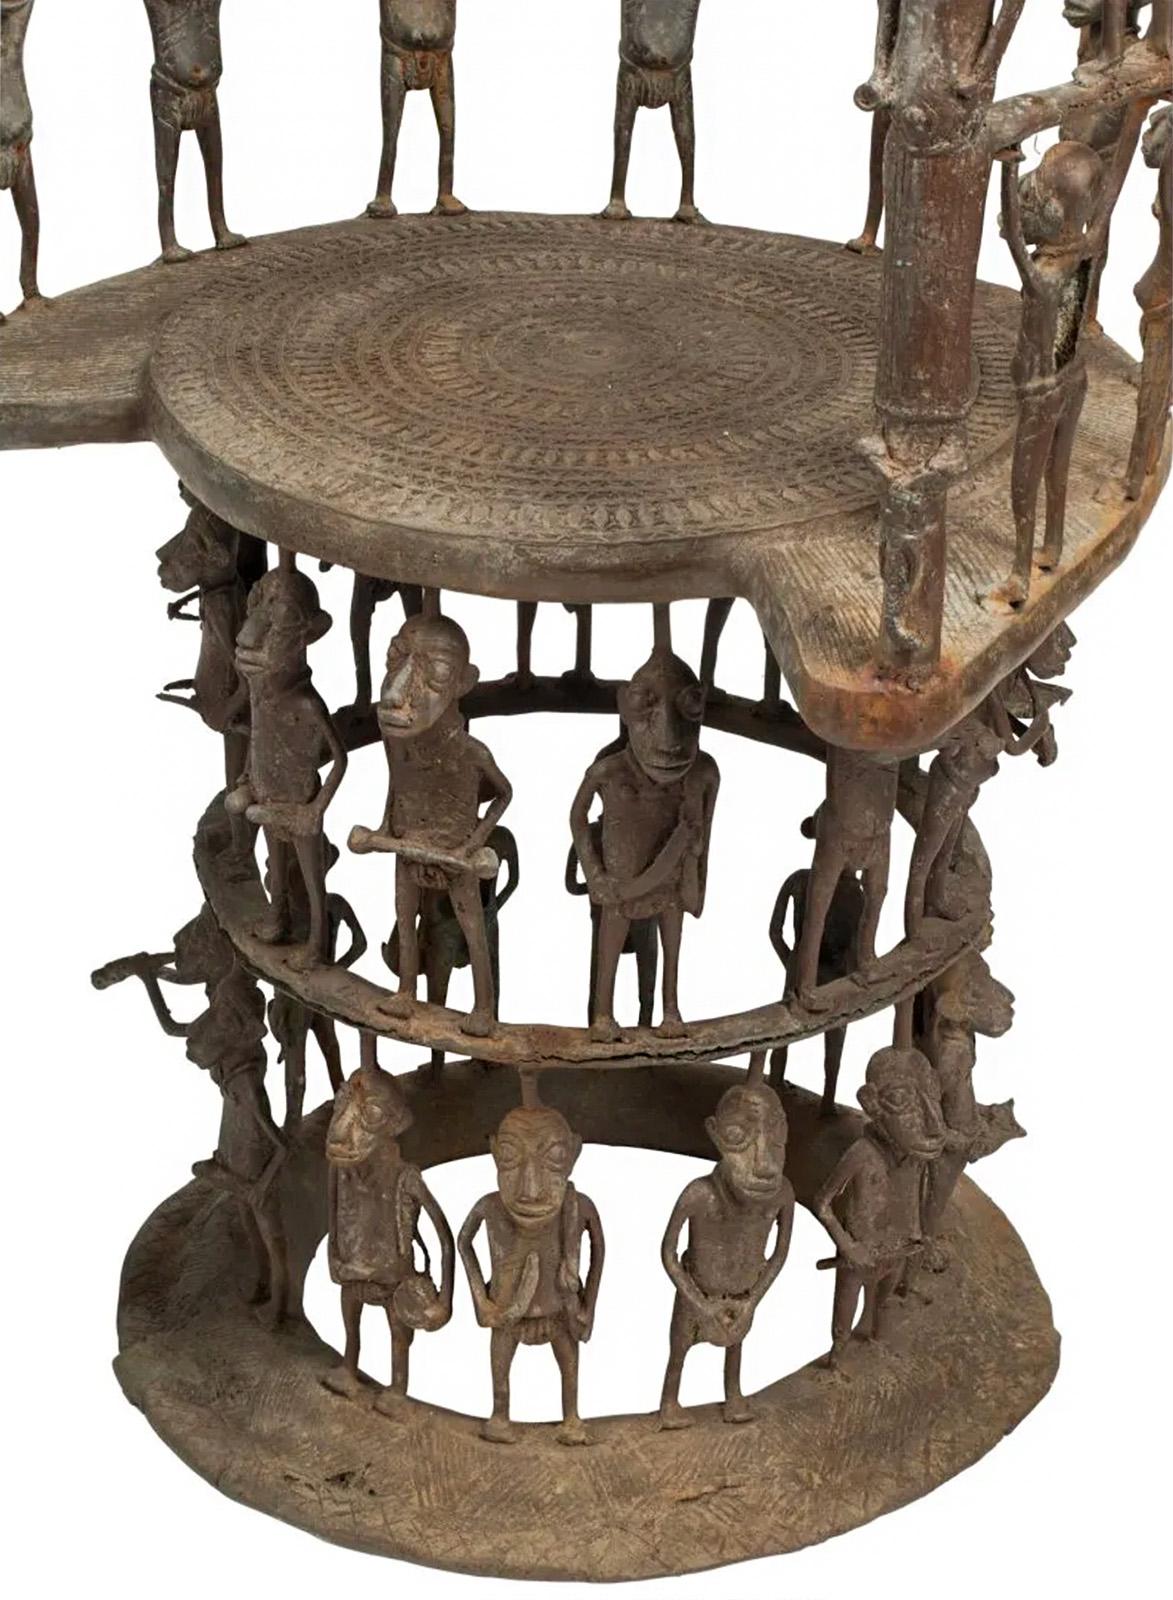 A pair of African bronze throne chairs with numerous figural sculptures on each. Made in a style that consciously references pieces from Benin, Cameroon, and other African cultures. 

Dimensions: 45